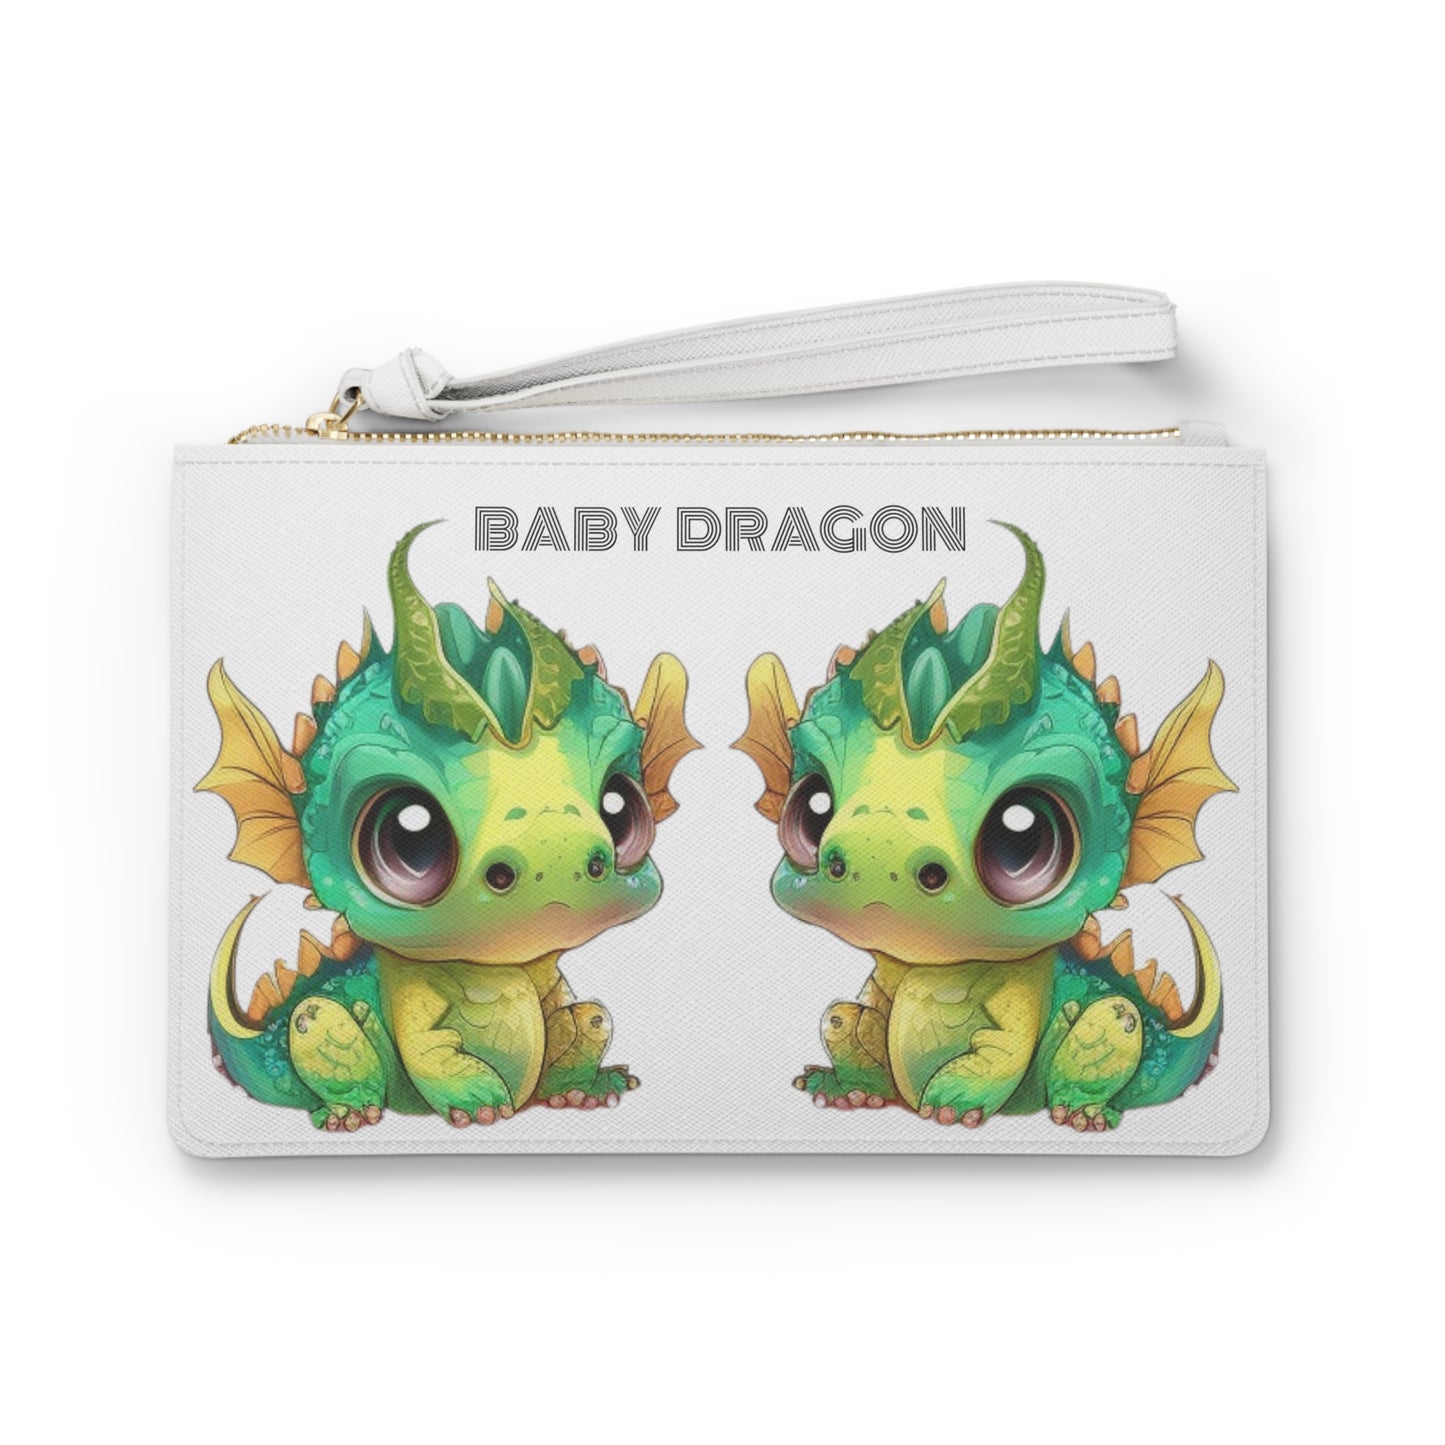 Baby Dragon is the decorative text above 2 darling baby Bobby dragons facing each other - Bobby is in greens and yellows with a little green horn popping out of his cute head - on a white vegan leather sofino patterned clutch bag with a loop white handle and gold zipper - excellent quality!